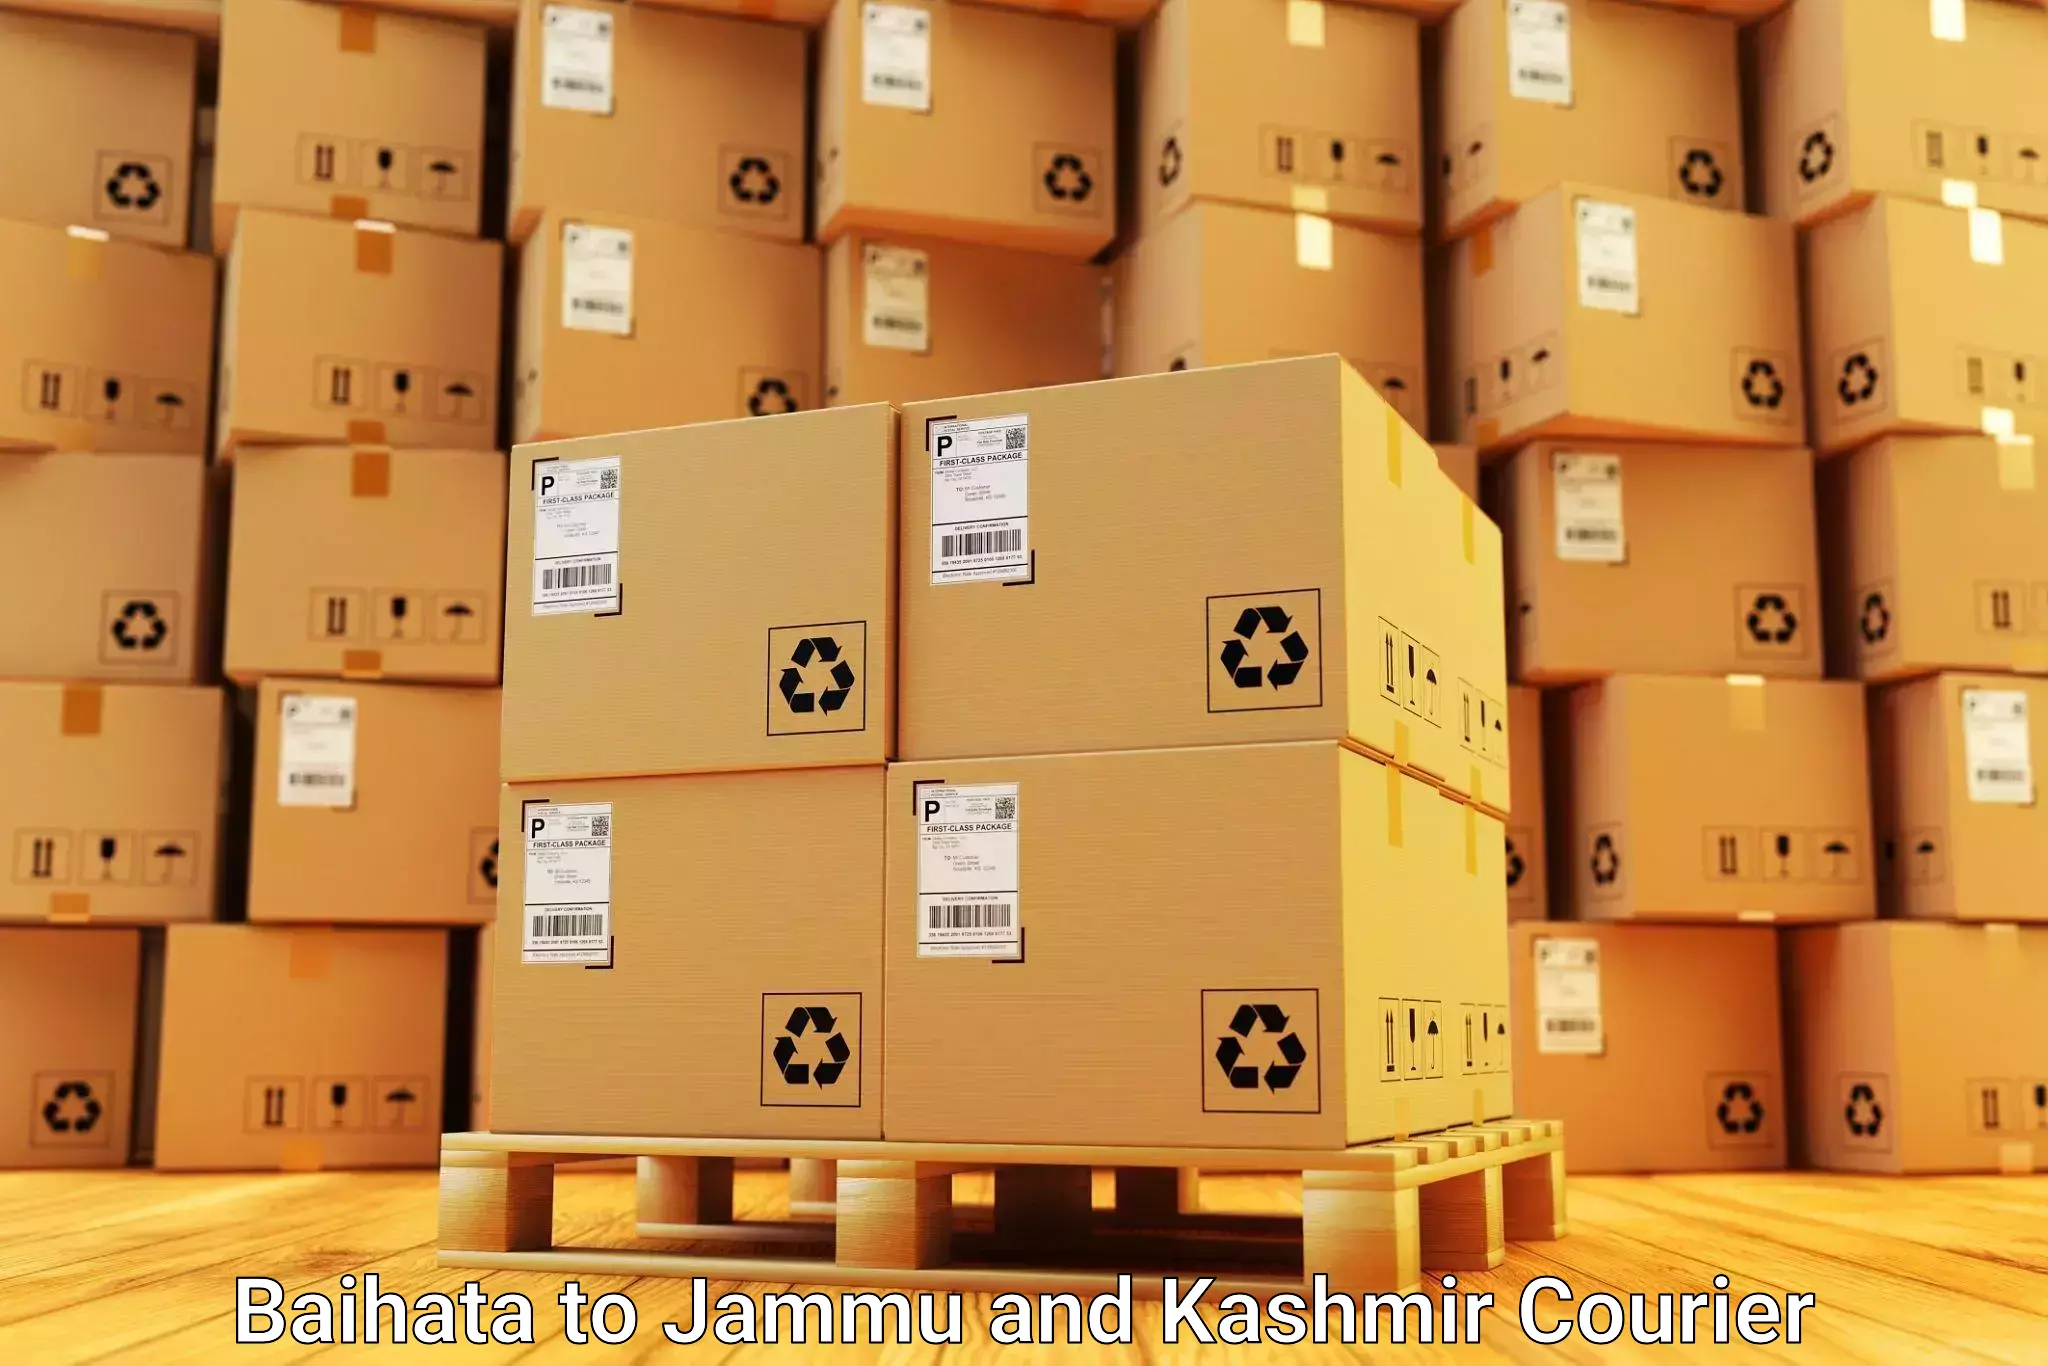 Full-service movers in Baihata to Jammu and Kashmir